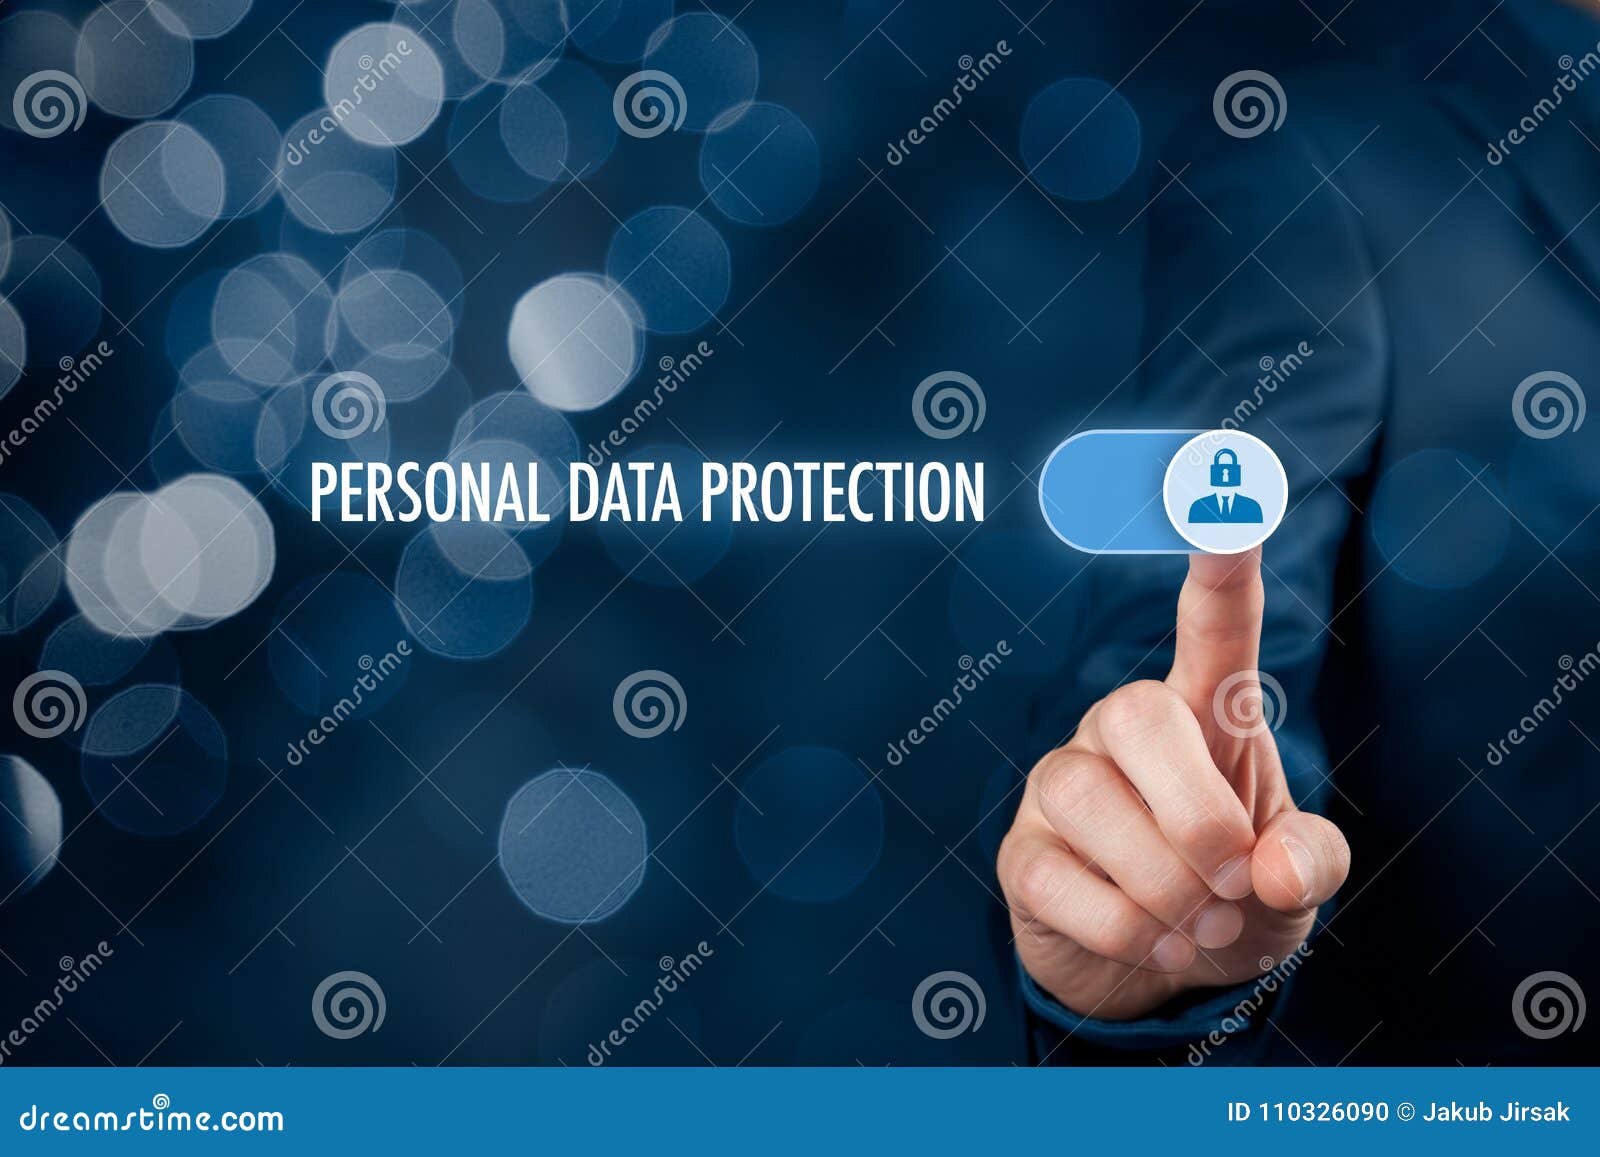 personal data protection concept